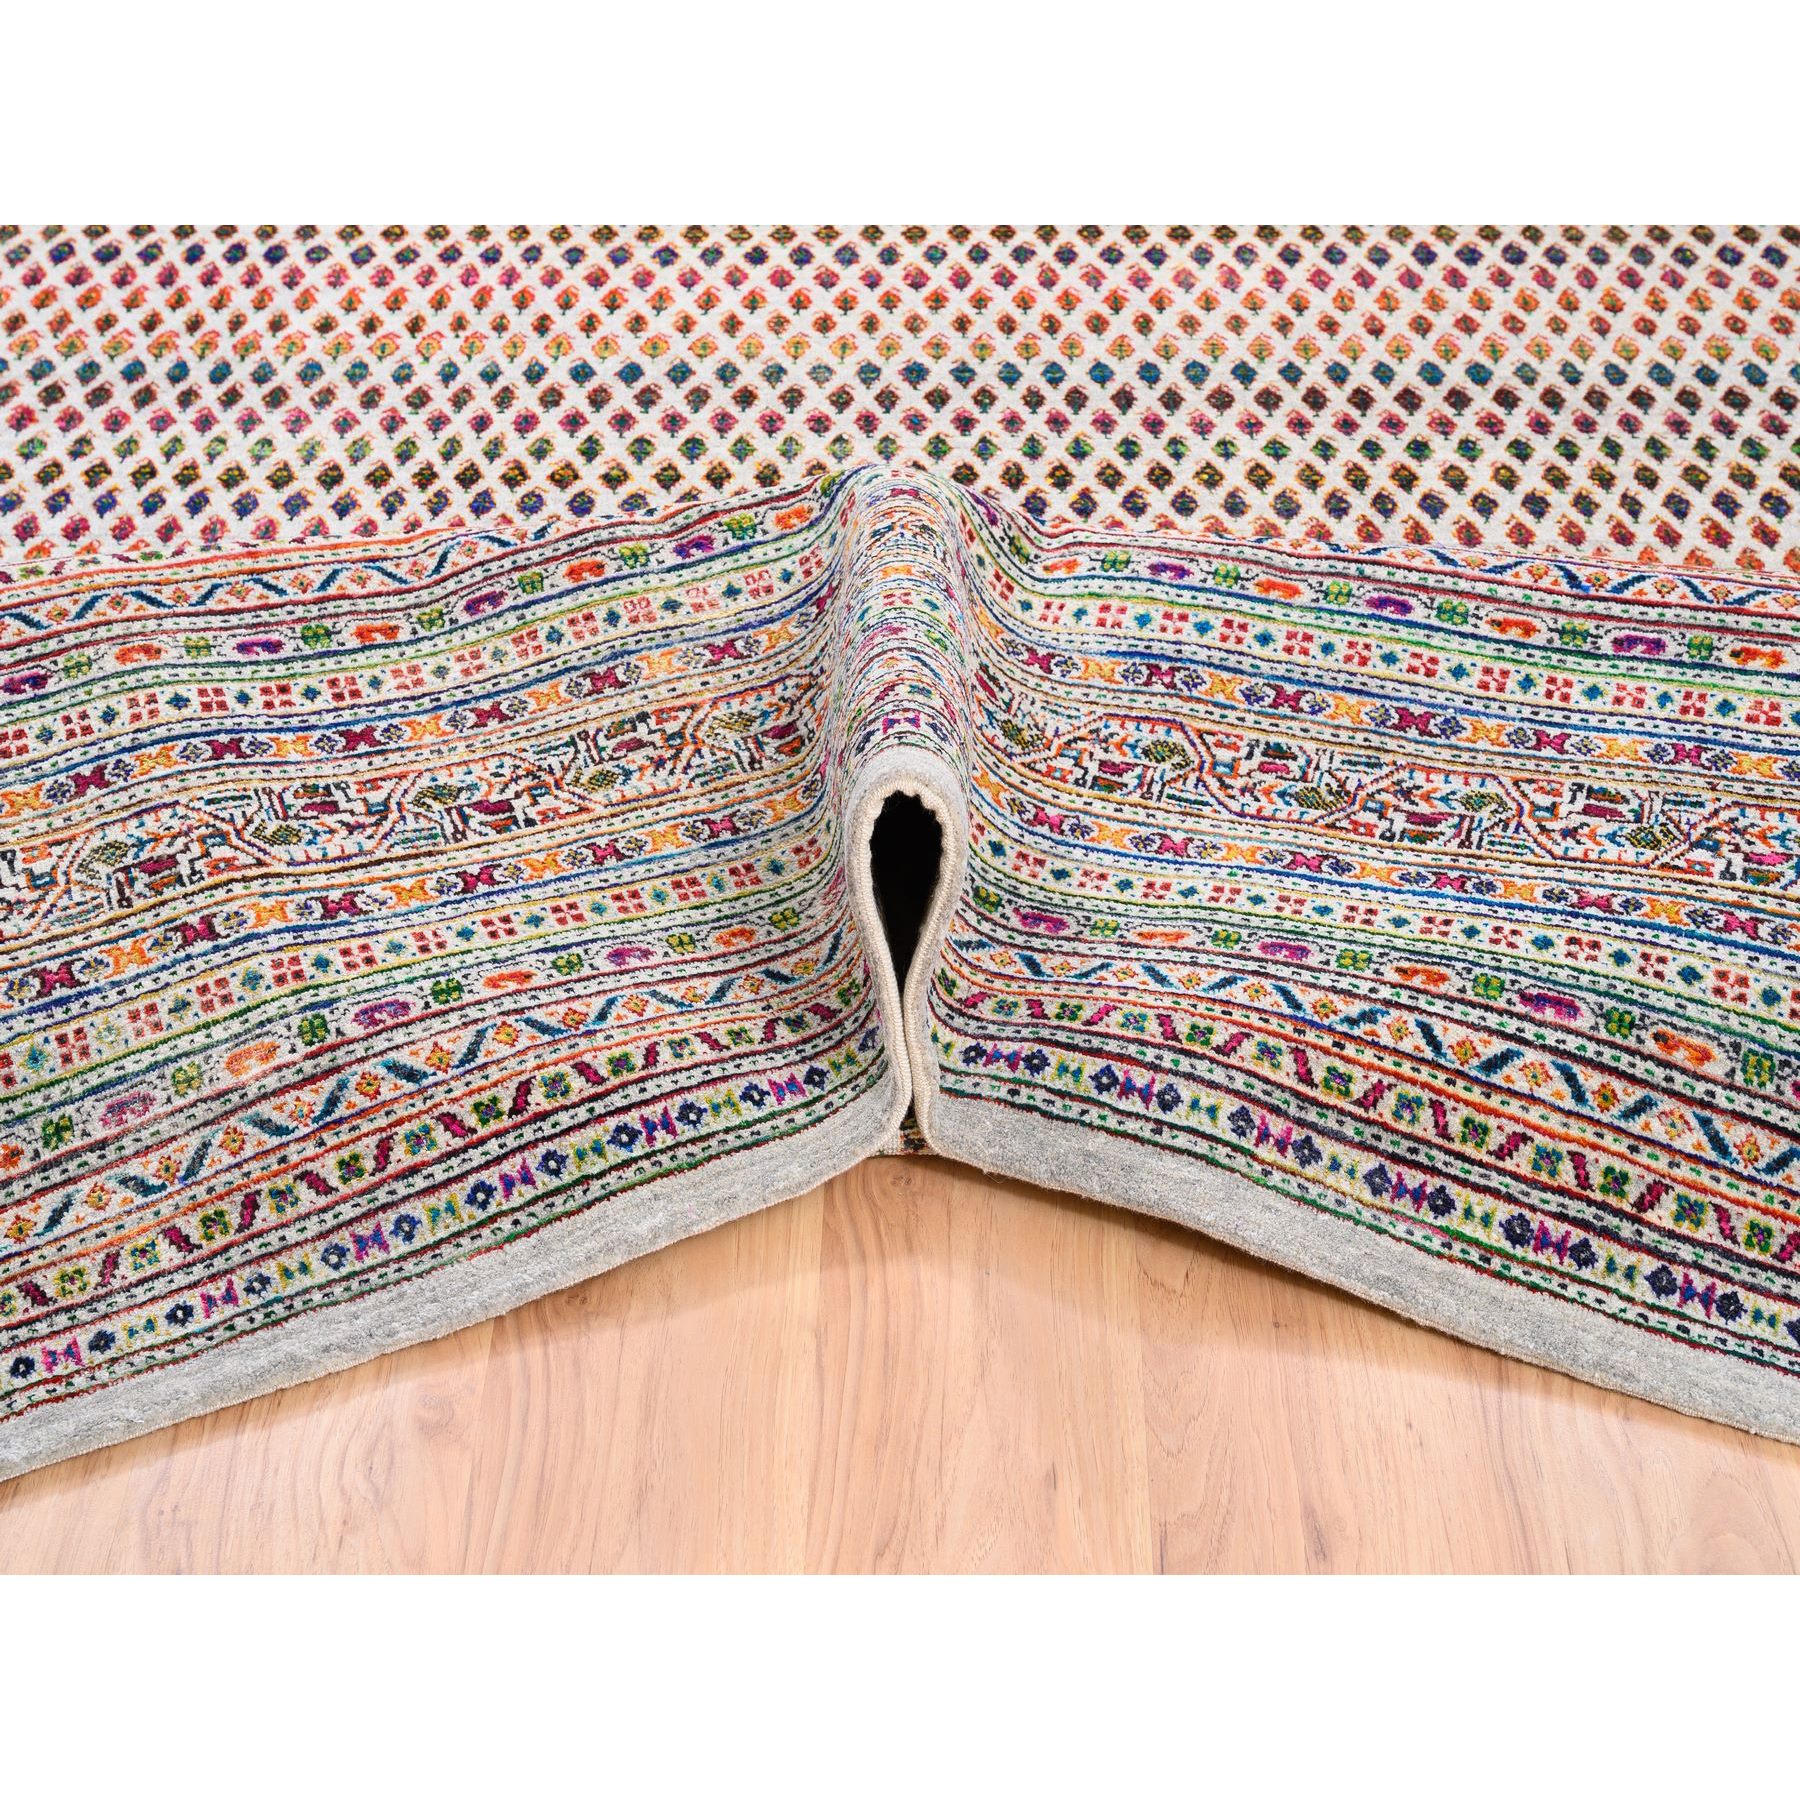 11'7"x18' Oversize Colorful Wool And Sari Silk Sarouk Mir Inspired With Small Repetitive Pattern Hand Woven Oriental Rug 